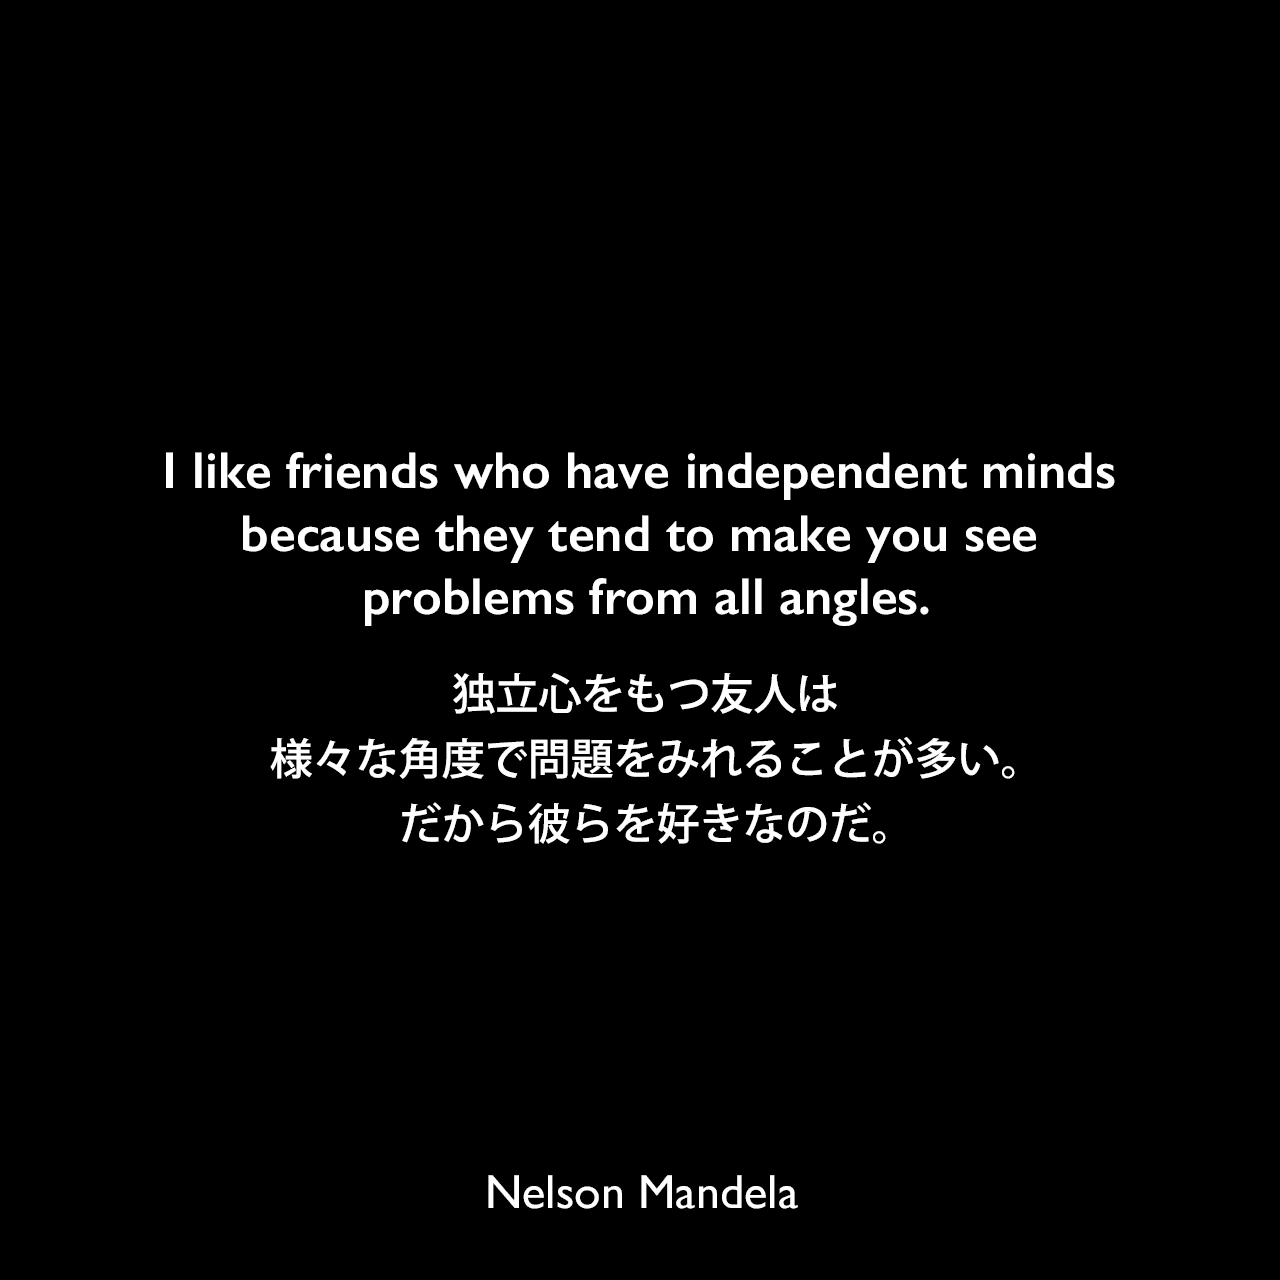 I like friends who have independent minds because they tend to make you see problems from all angles.独立心をもつ友人は、様々な角度で問題をみれることが多い。だから彼らを好きなのだ。- ネルソン・マンデラによる本「Nelson Mandela by Himself: The Authorised Book of Quotations」よりNelson Mandela